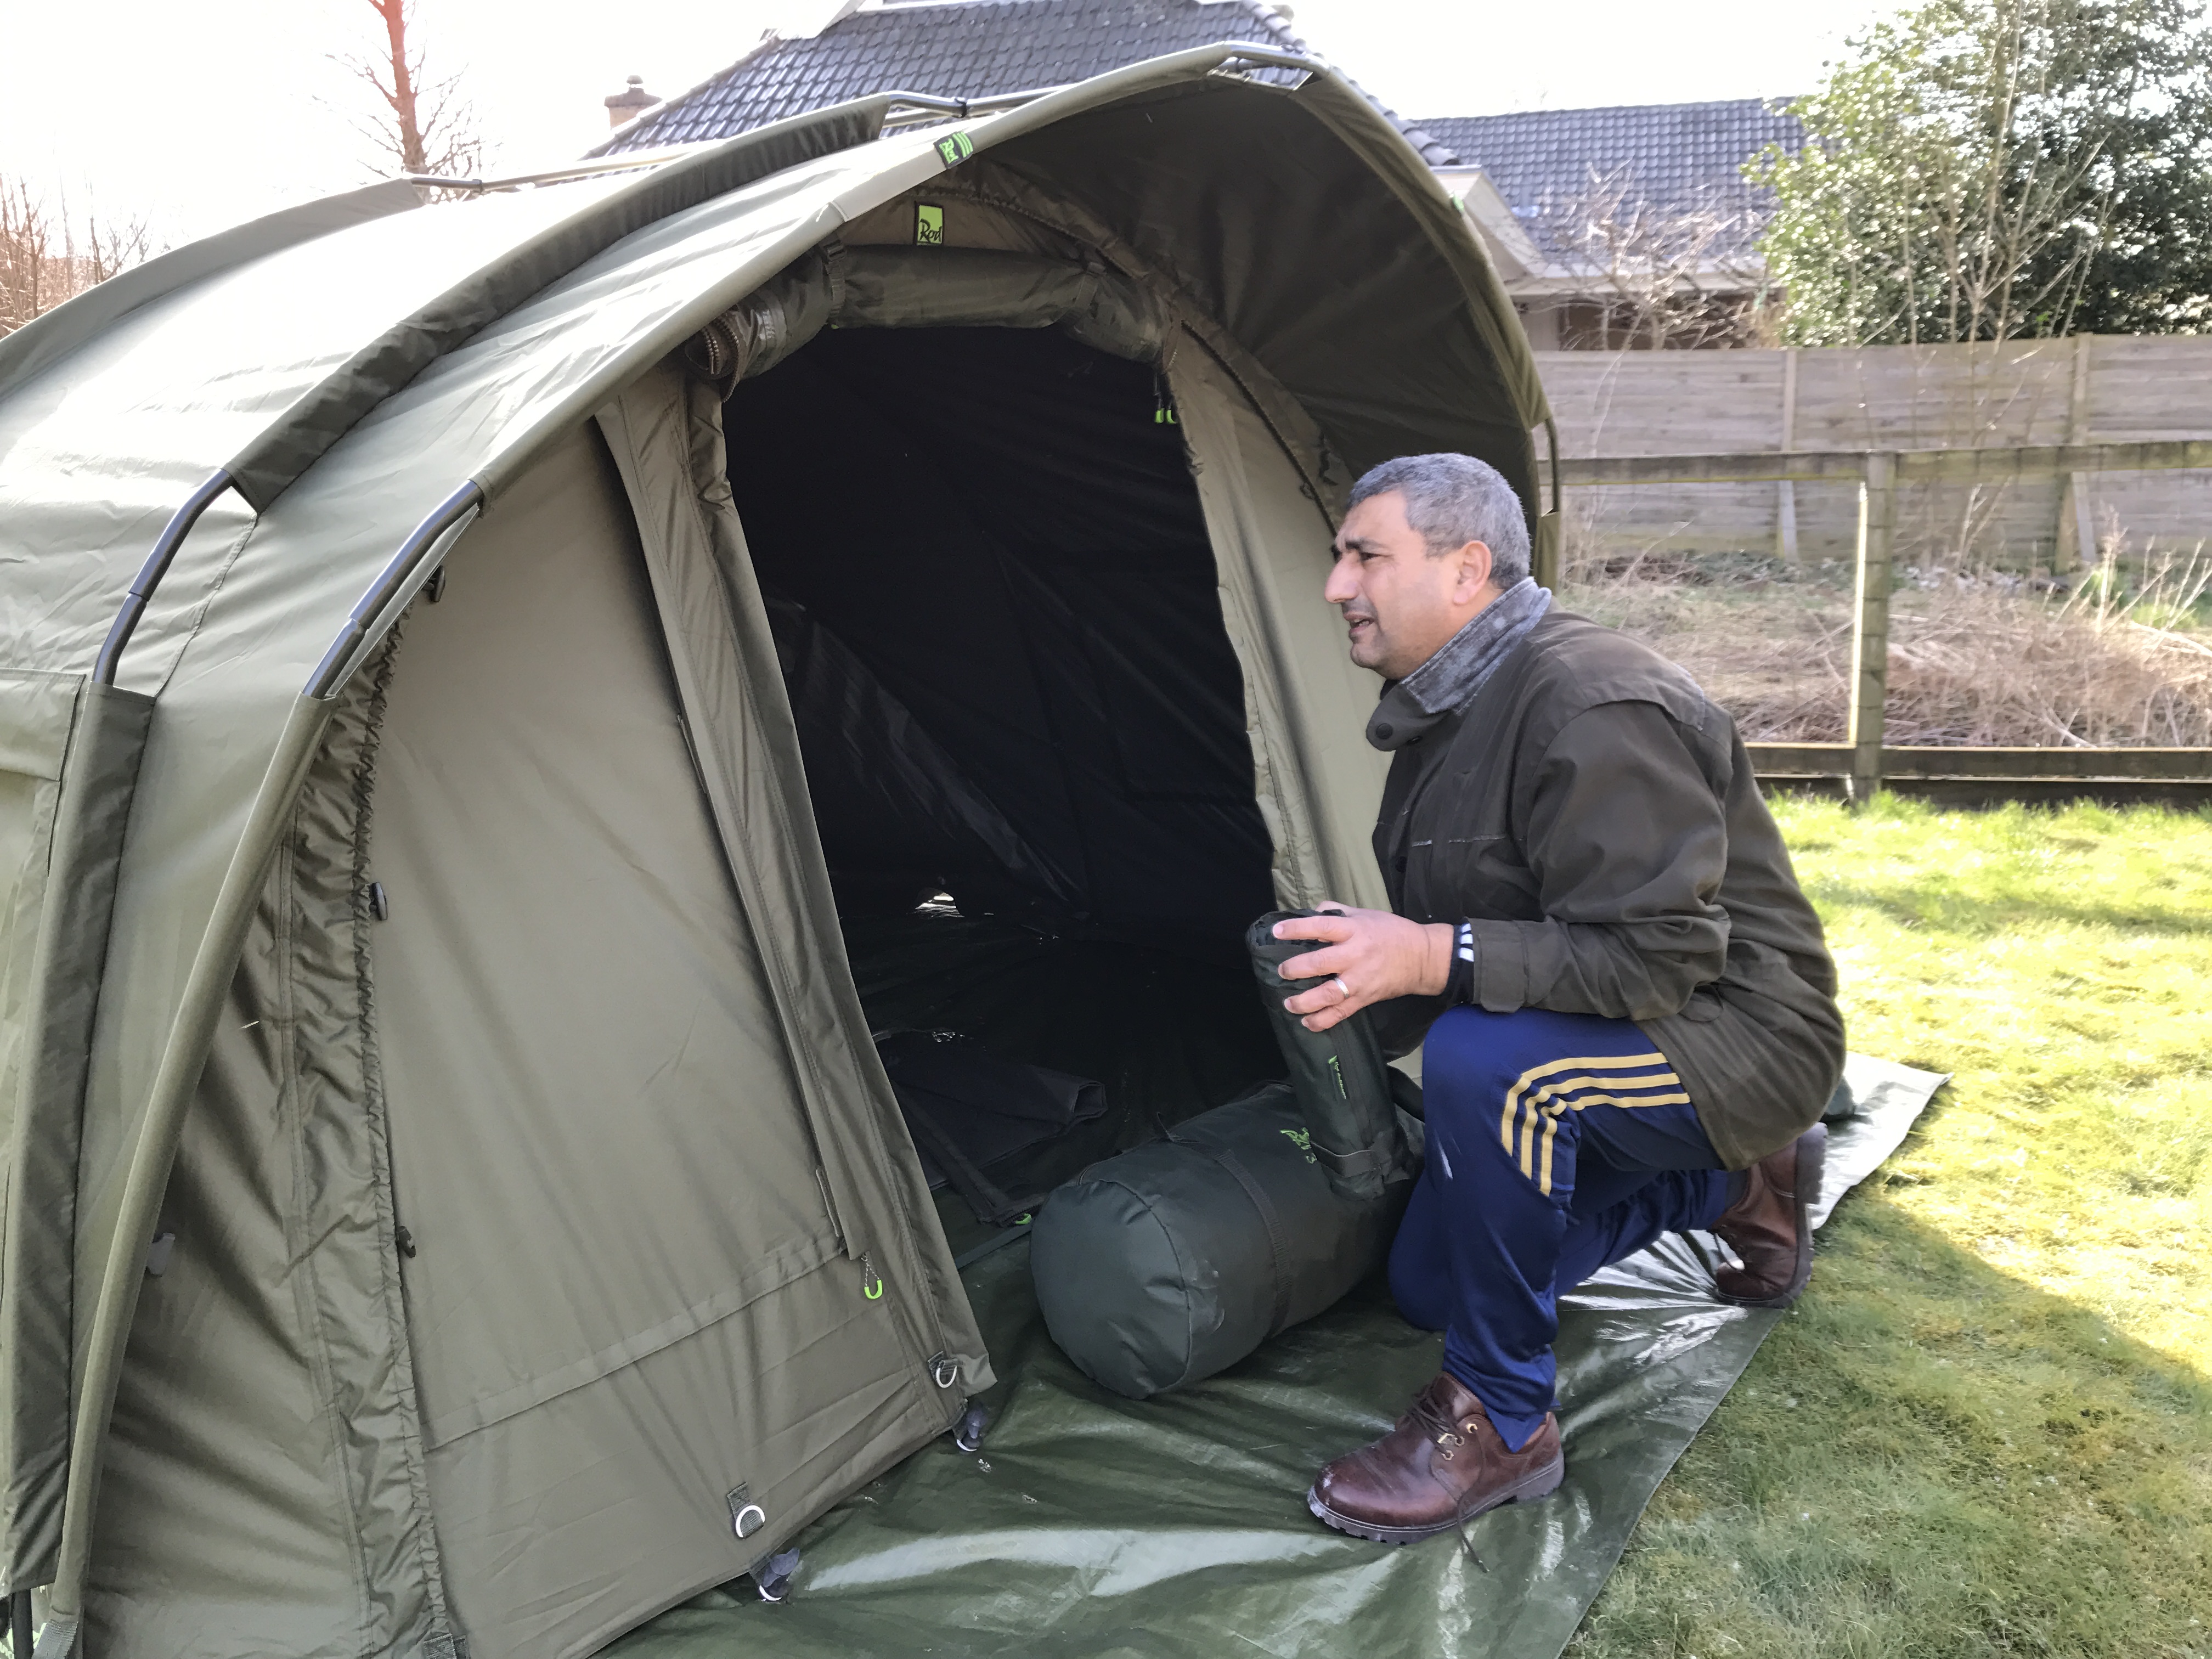 In 2017 a brand new Rod Hutchinson bivvy landed at home...